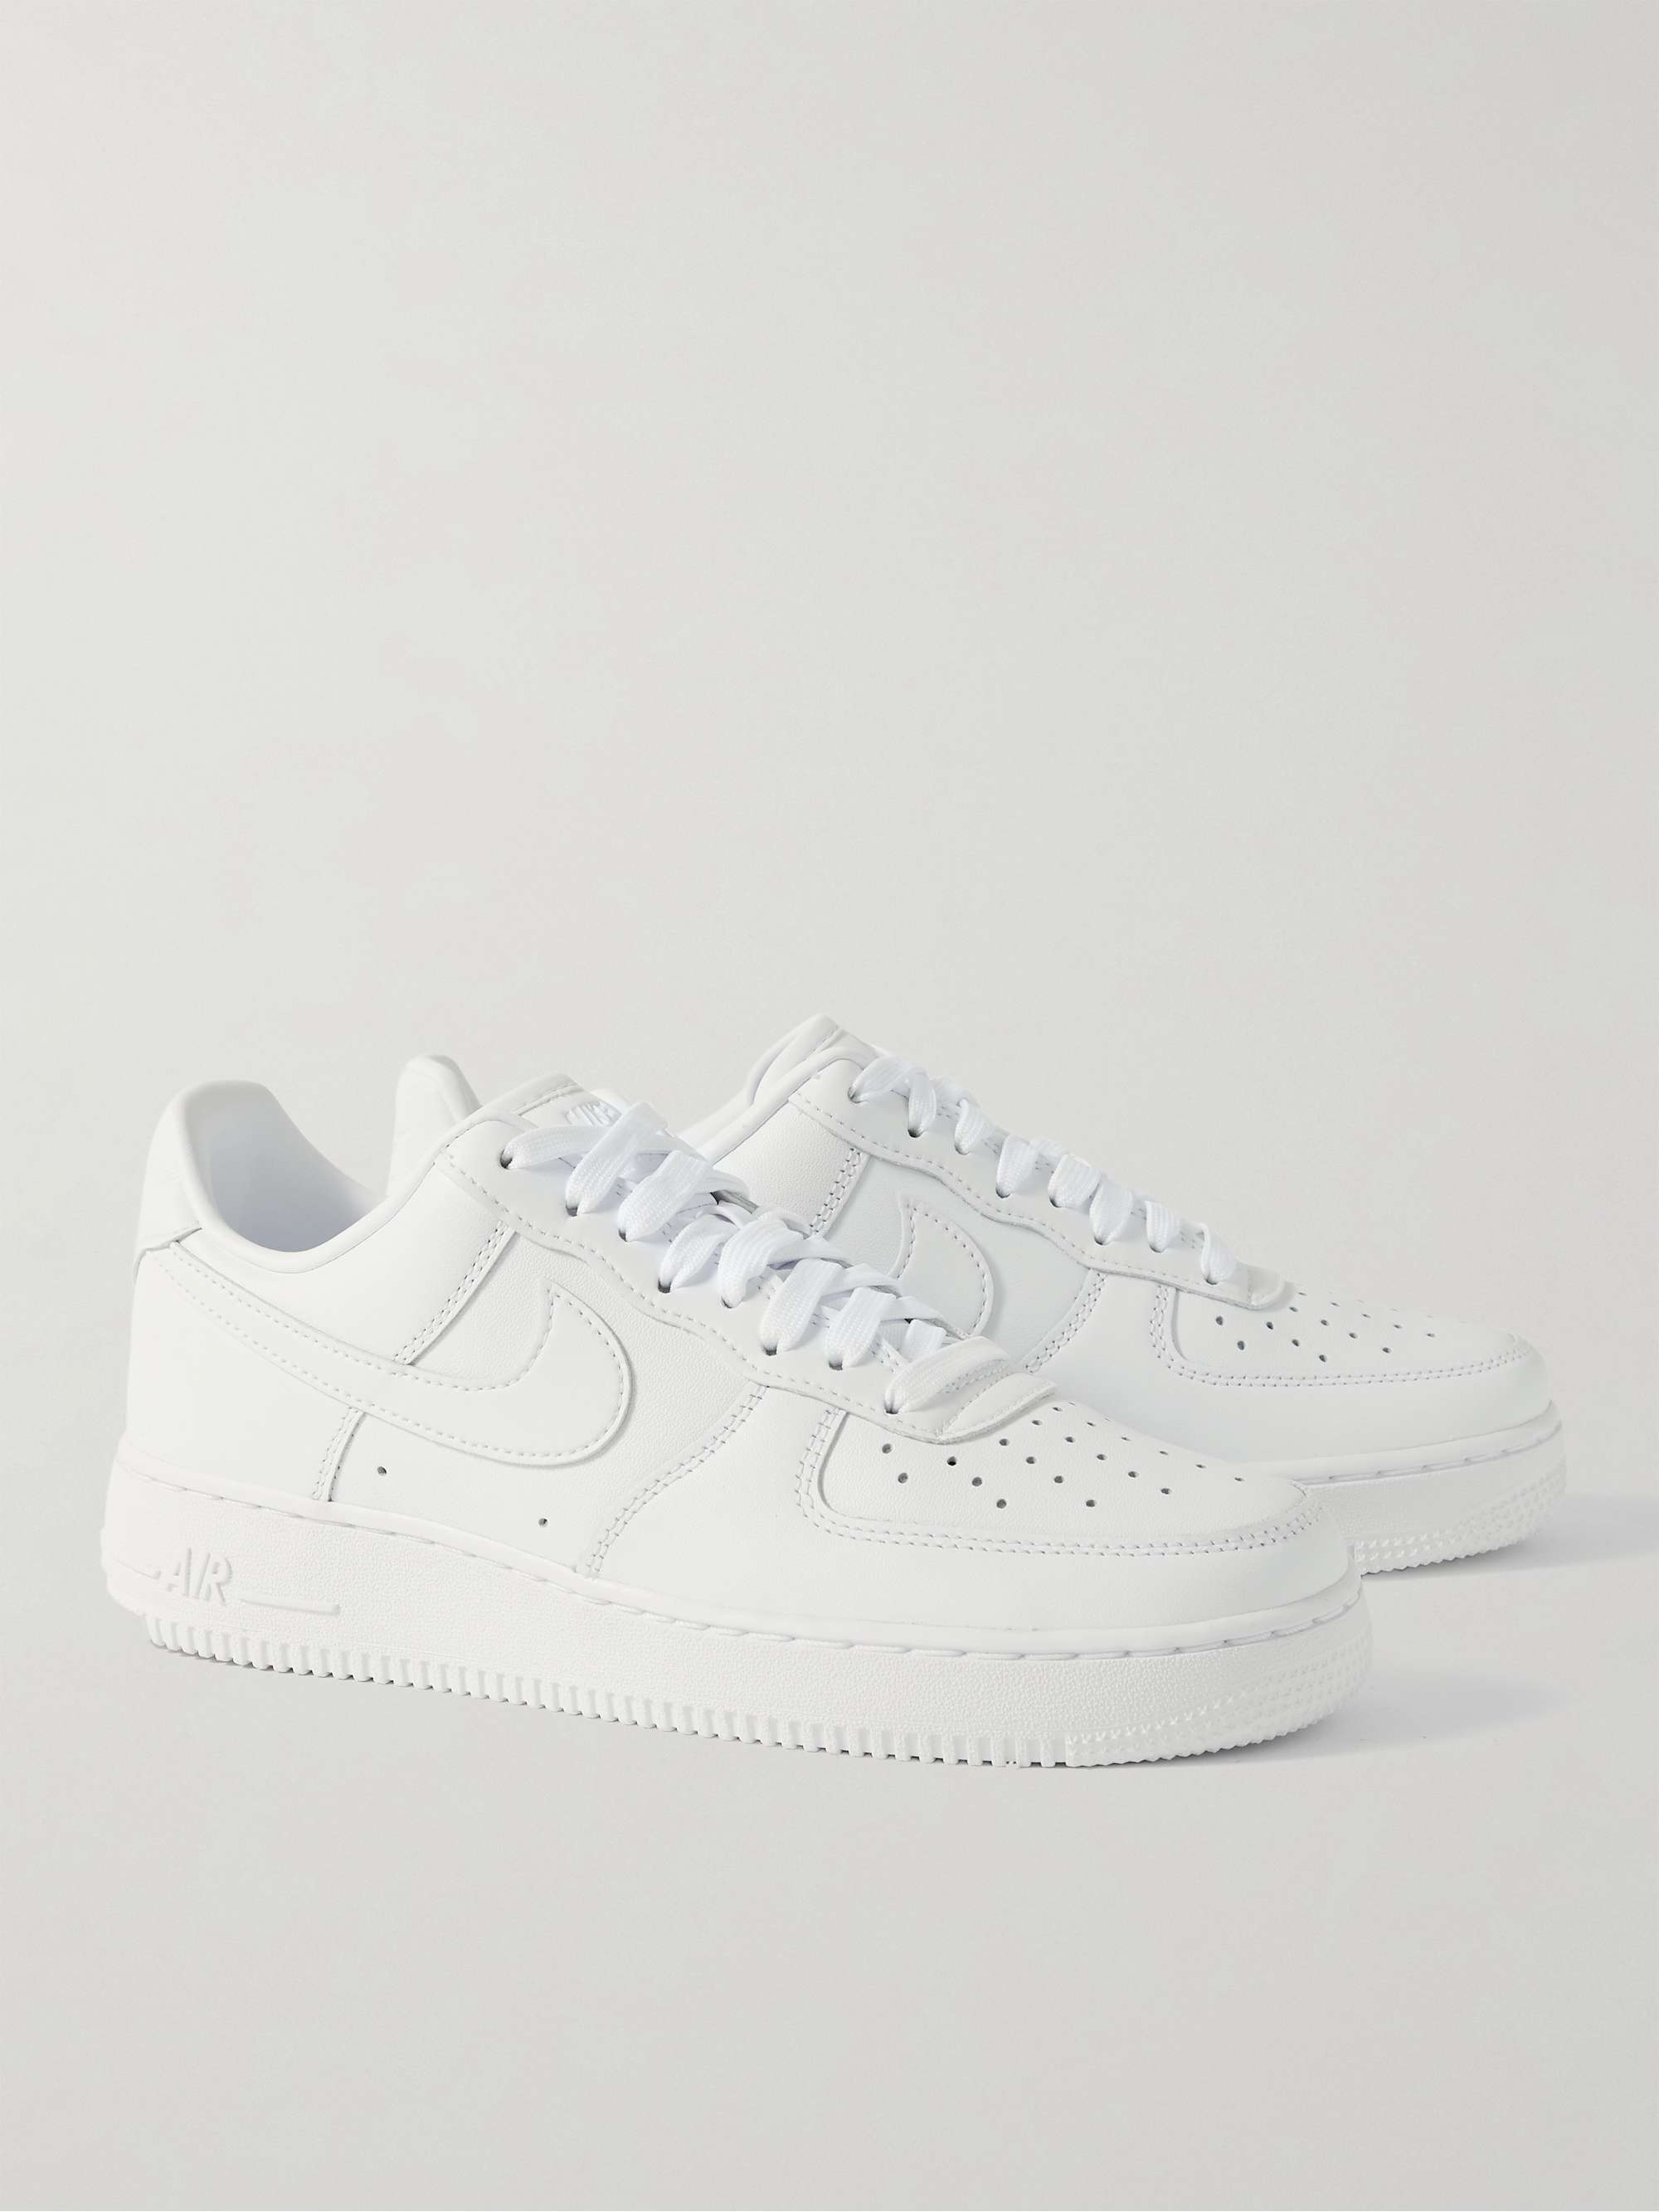 White Air Force 1 '07 Fresh Leather Sneakers | NIKE | MR PORTER